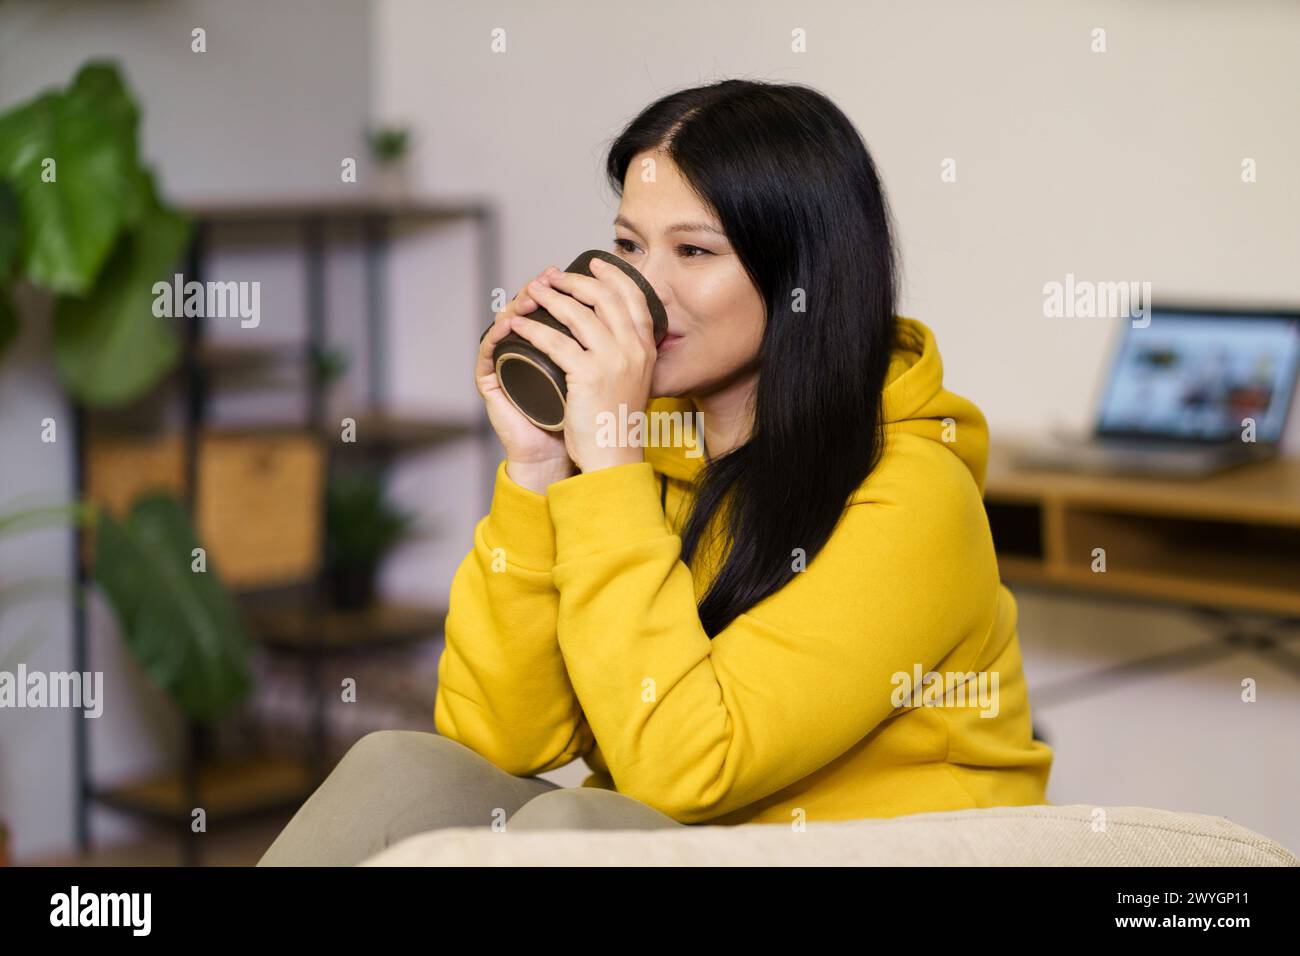 A woman in a yellow hoodie is drinking coffee. She is smiling and she is enjoying her drink Stock Photo